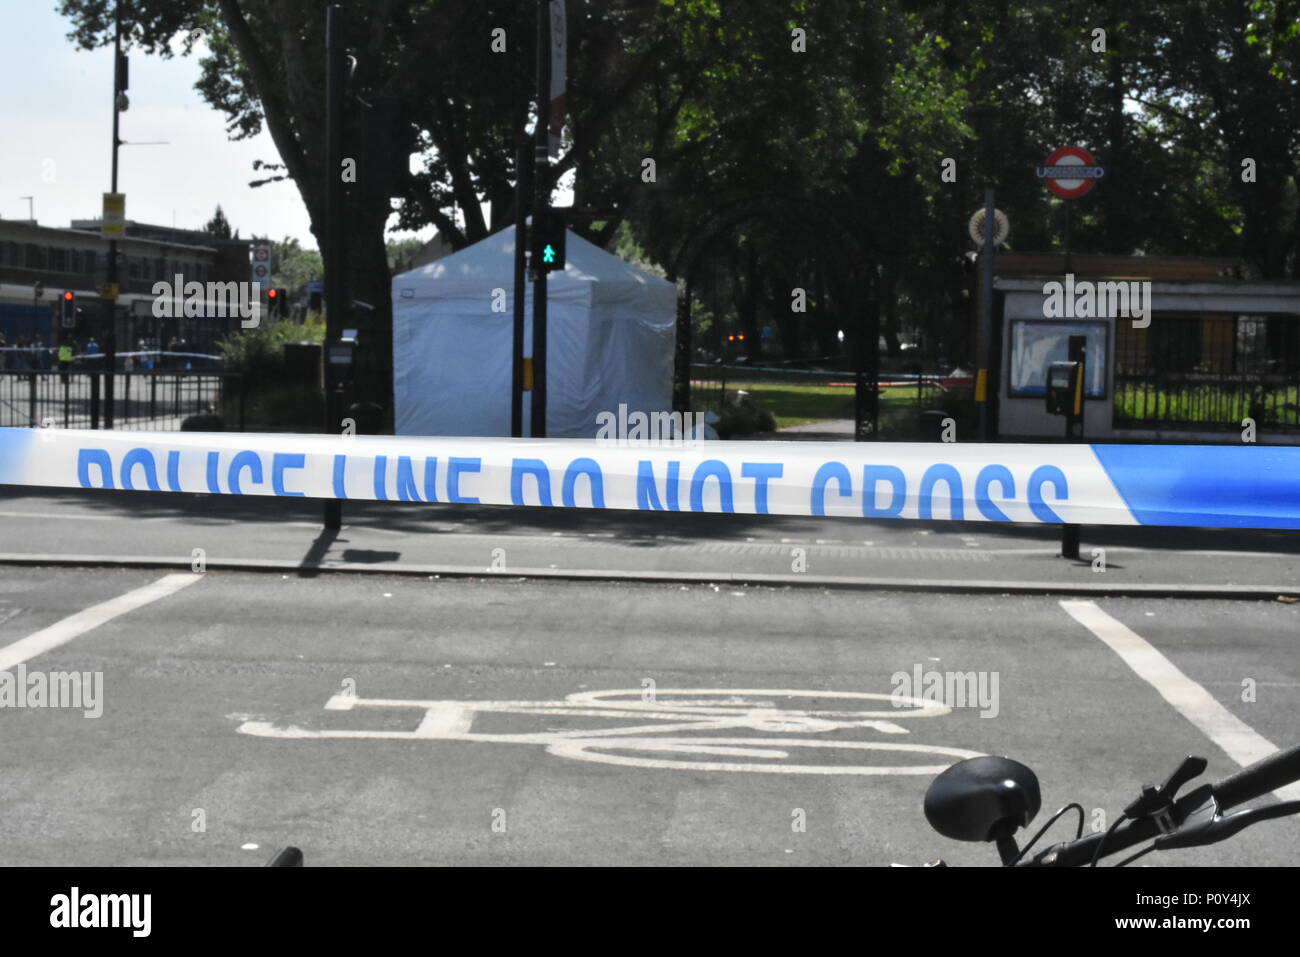 London, UK. 10th June 2018. The capital see's the 74th murder this year so far as the murder scene of a man said to be in his 30s was fatally stabbed to death. he was pronounced dead on the scene by the ambulance and police services that arrived on the scene in response to calls of a seriously injured man it turned out that the victim had been fatally stabbed. The Metropolitan Police have opened their 74th murder investigation after this latest incident to hit the capital city of London in this frenzy of knife crime. Credit: Ricardo Maynard/Alamy Live News Stock Photo